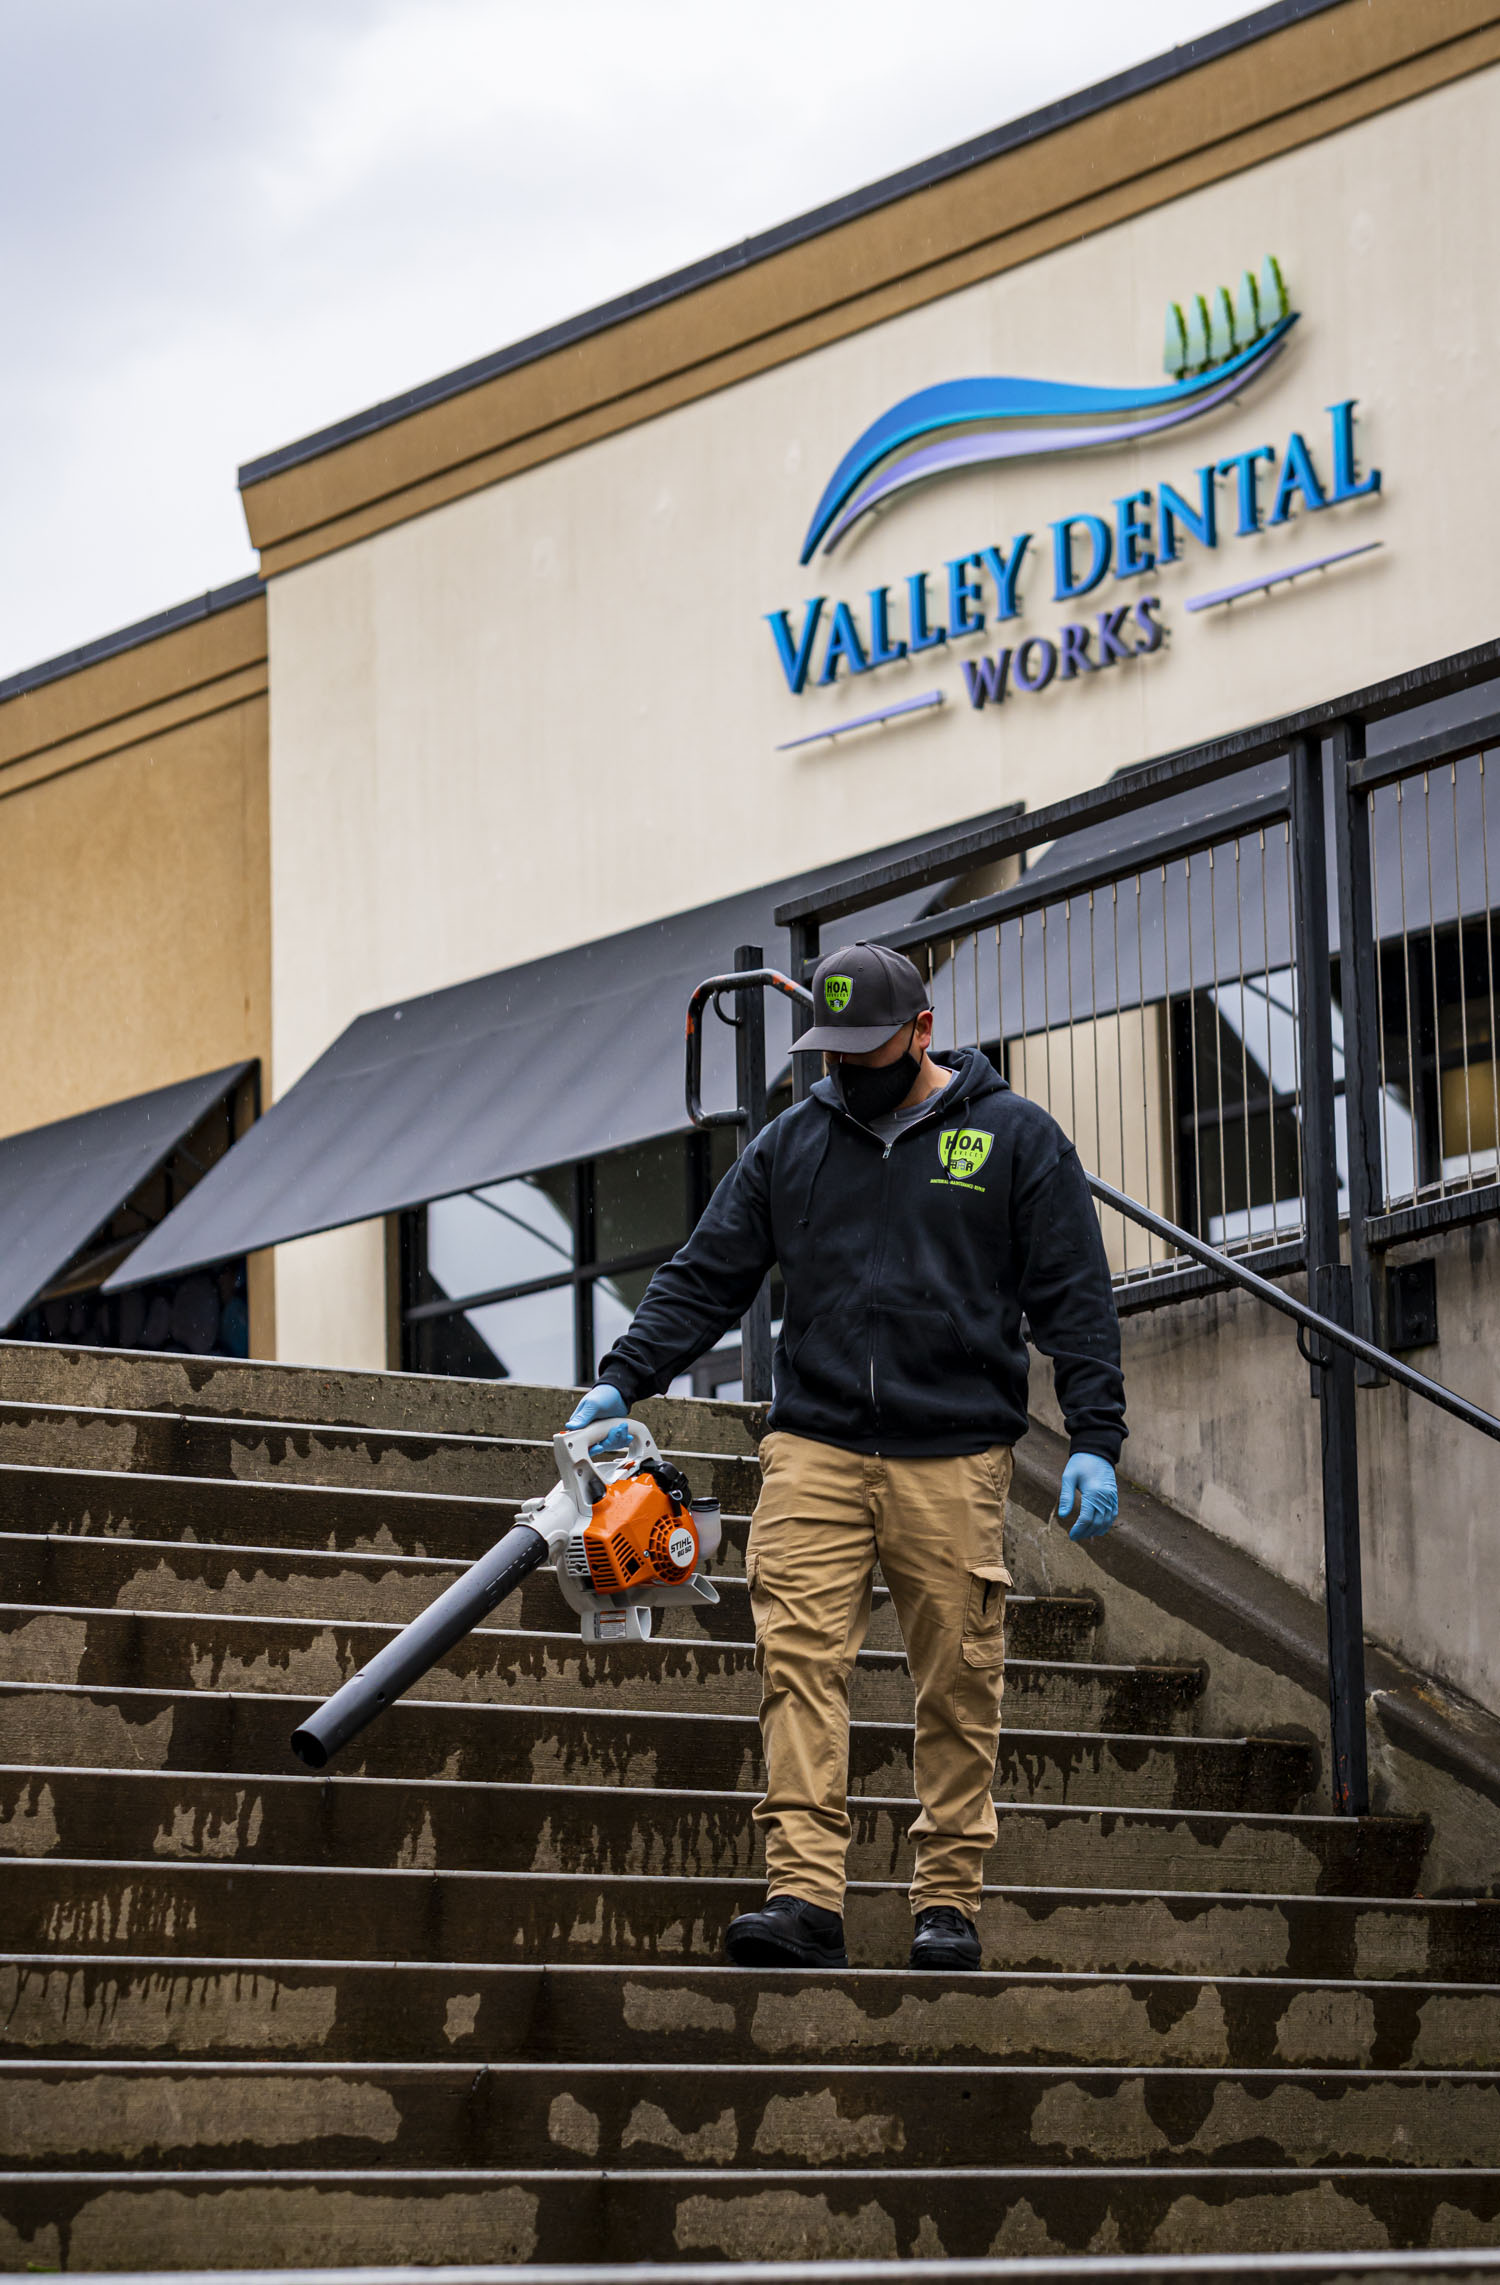 Janitorial services for commercial centers